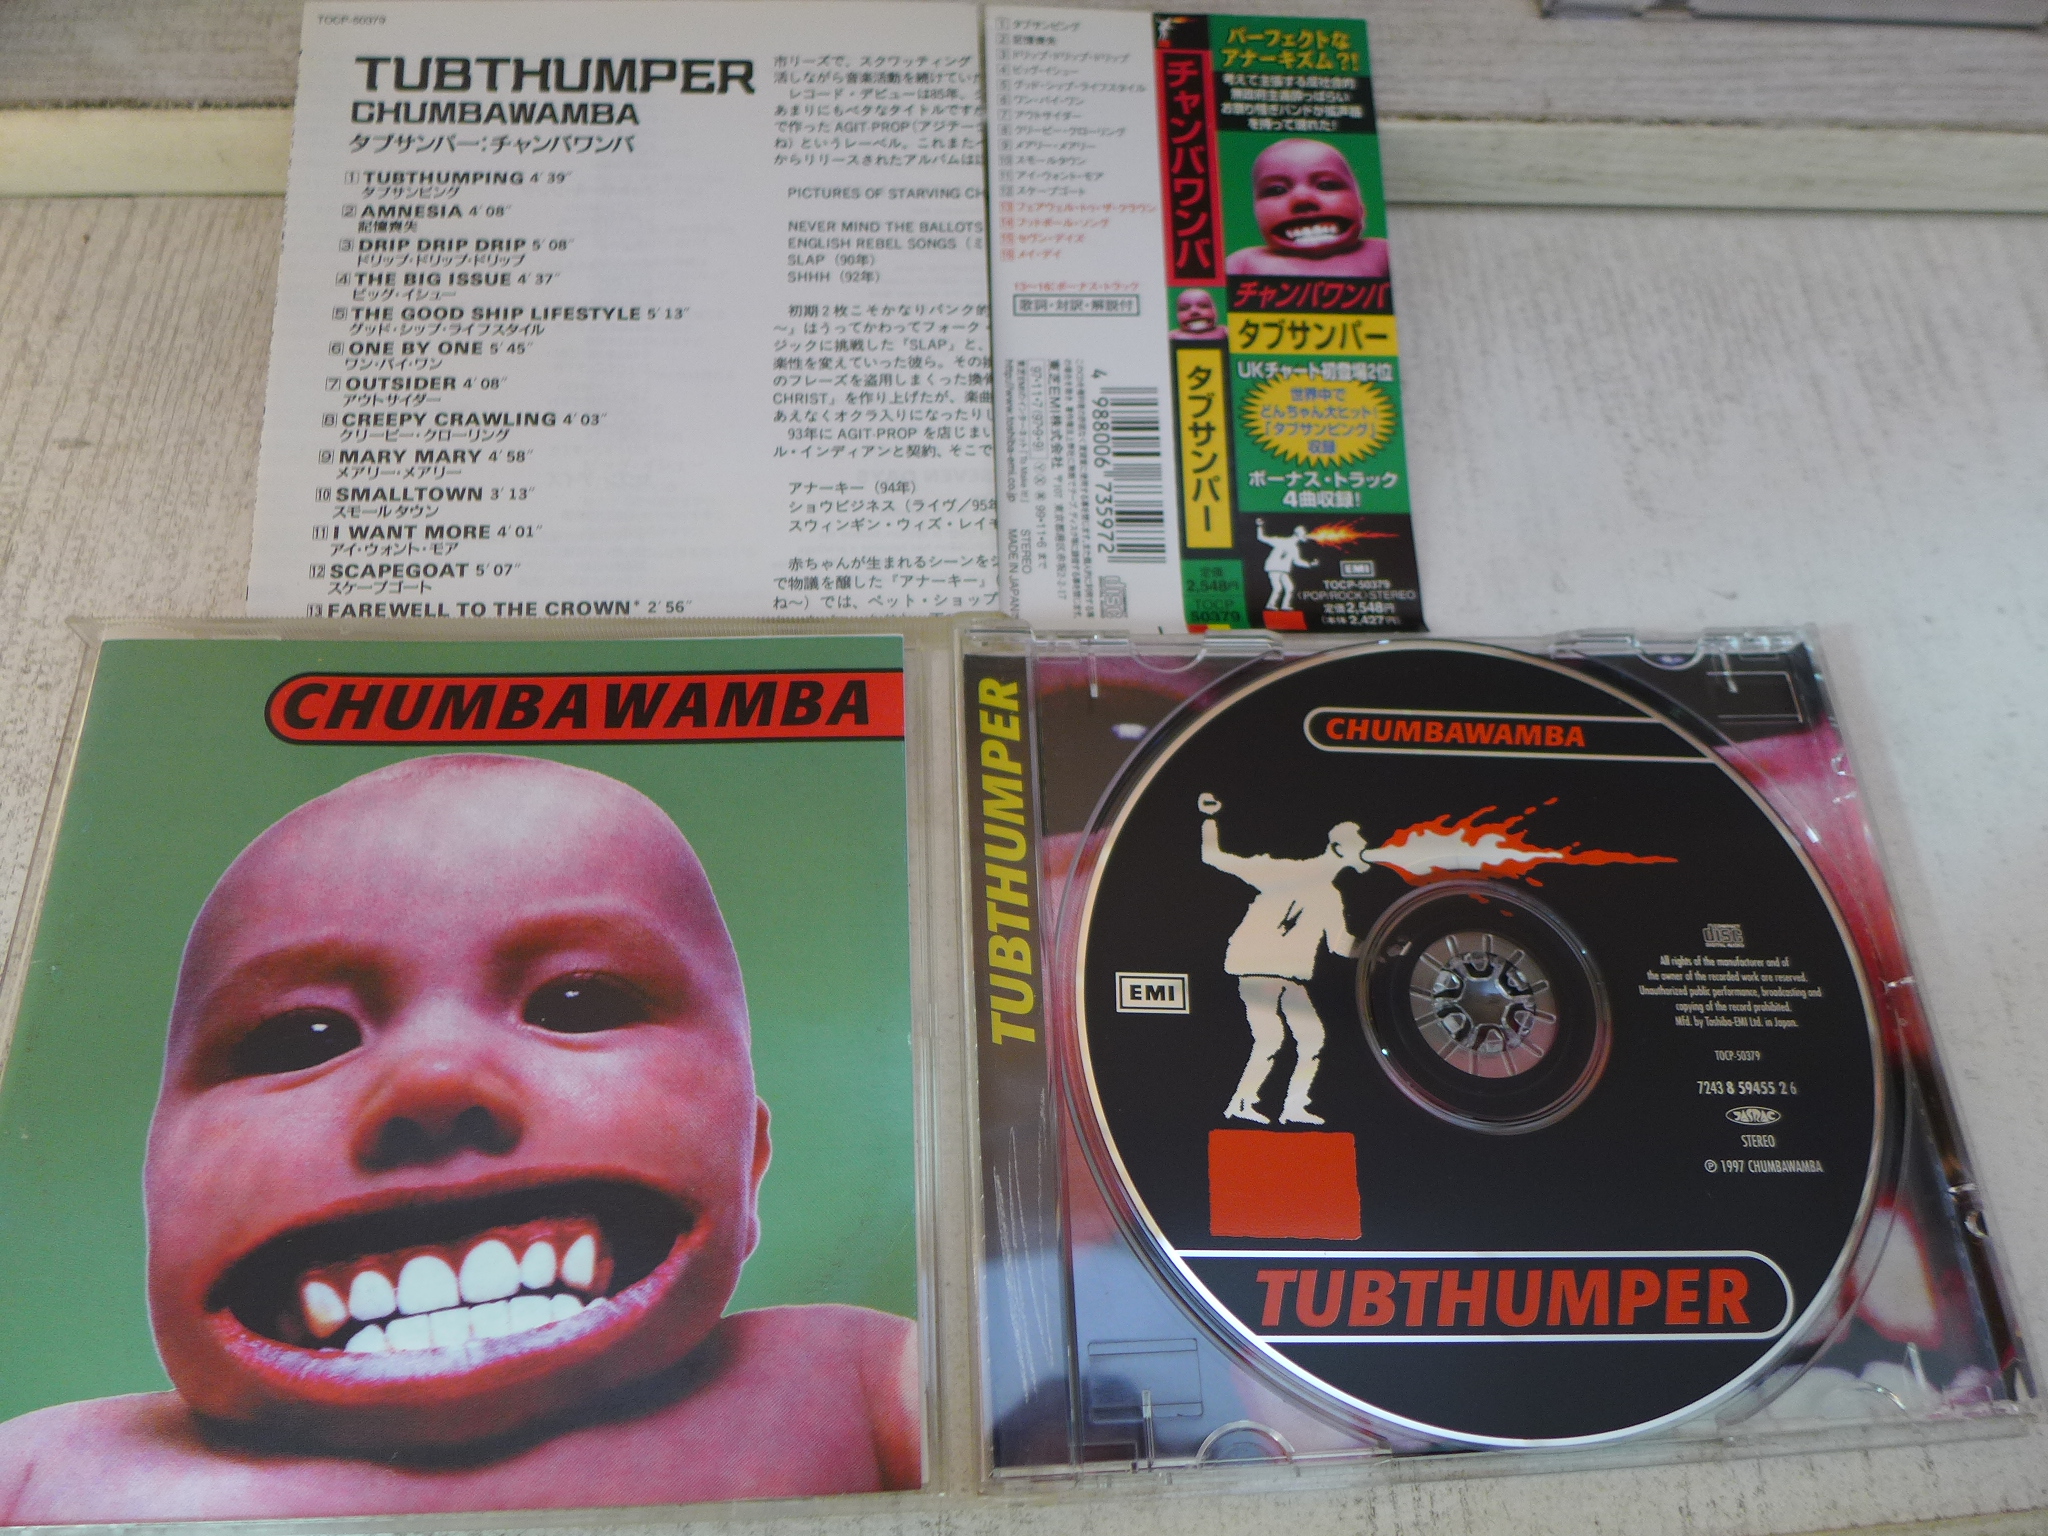 Authentic CD R pop rock electronic back punk band chumbawamba with sidebar